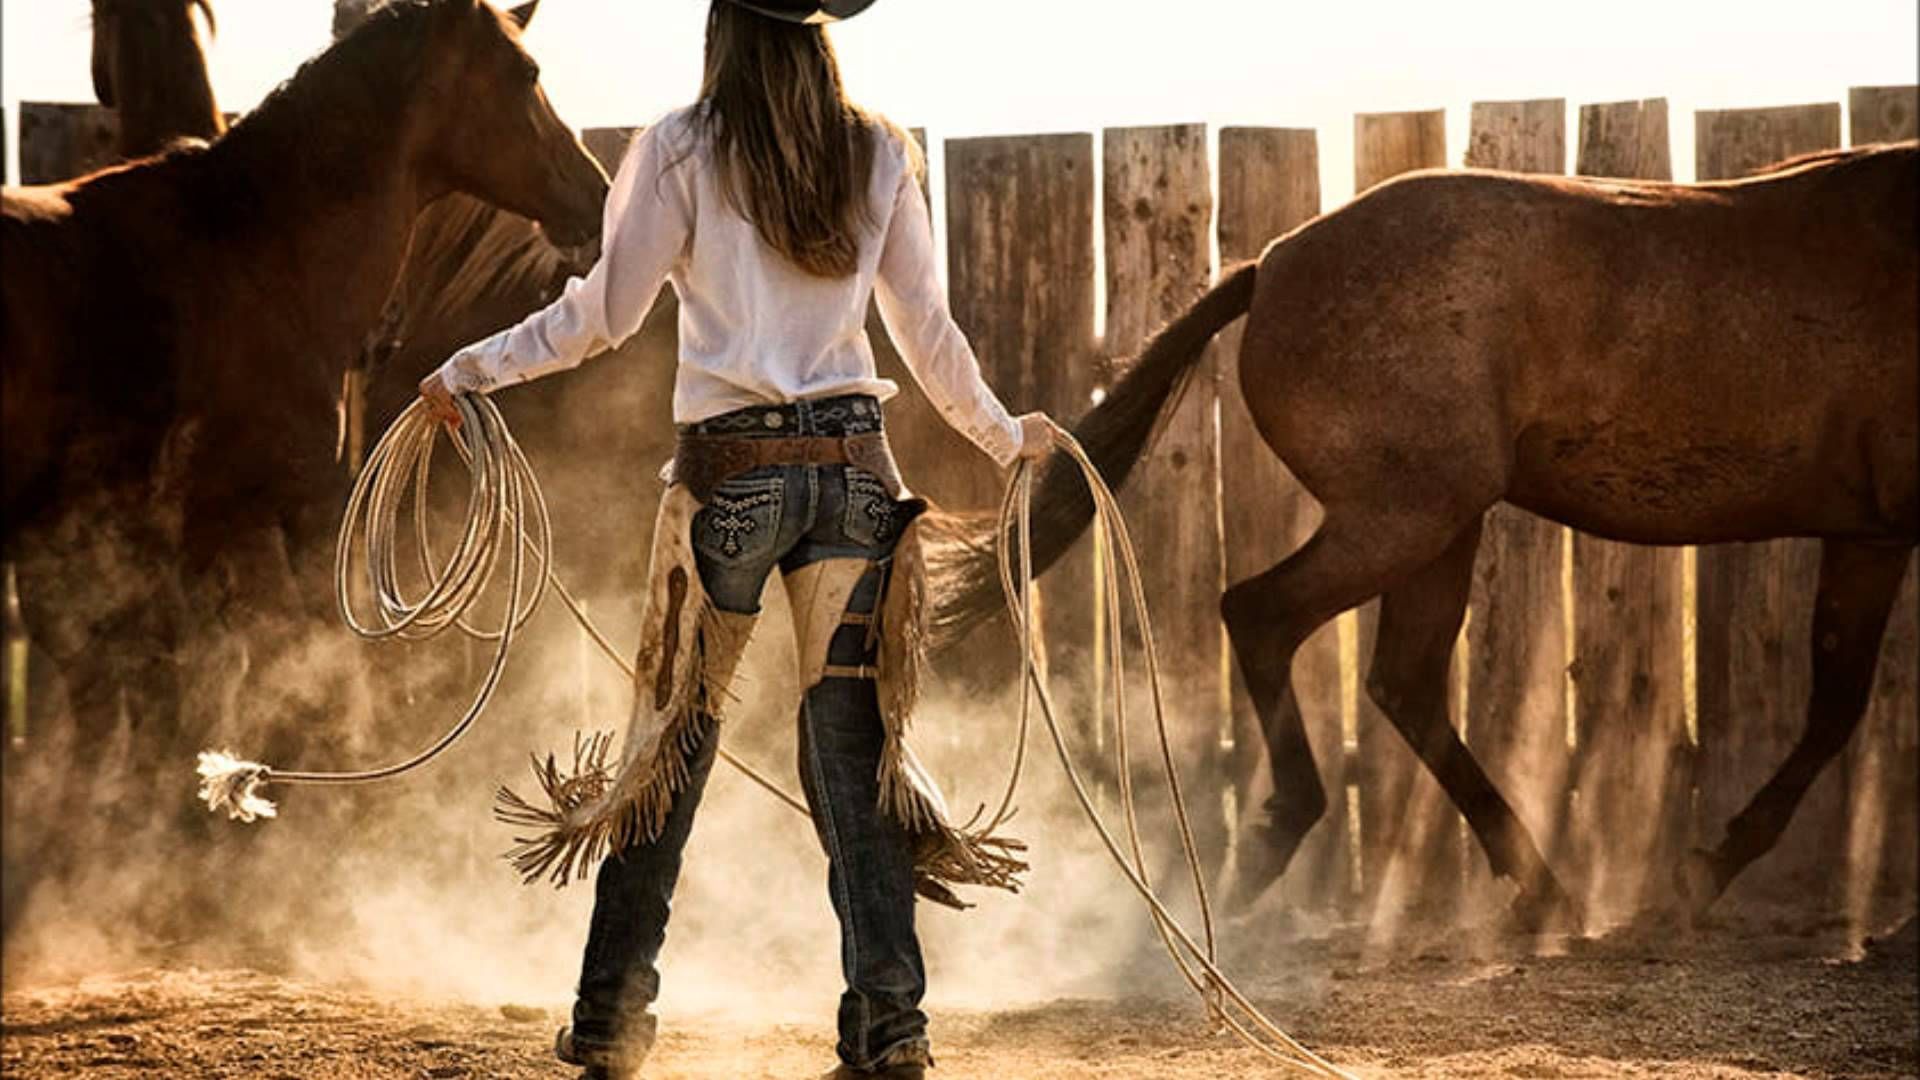 Cowgirl Wallpaper HD. Horses, Cowgirl and horse, Horse love